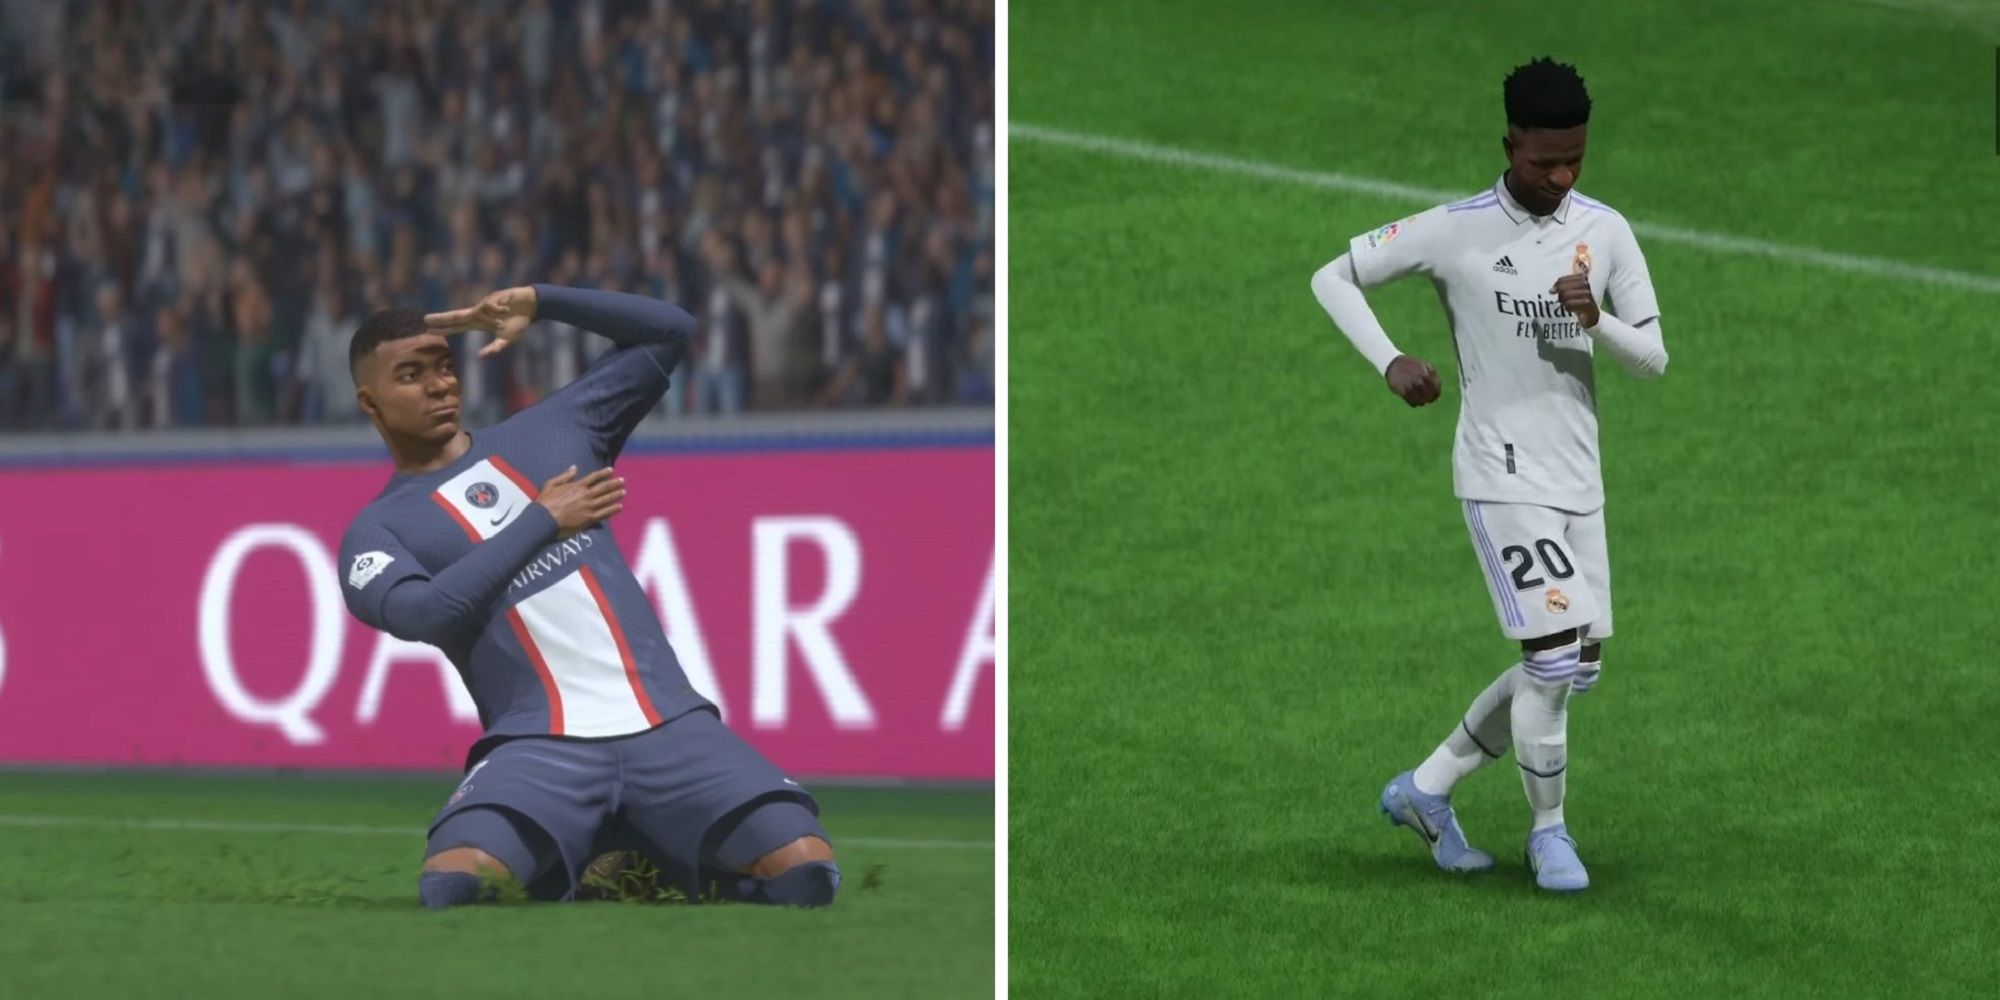 An image of Kylian Mbappé and Vinícius Júnior performing their celebrations in FIFA 23